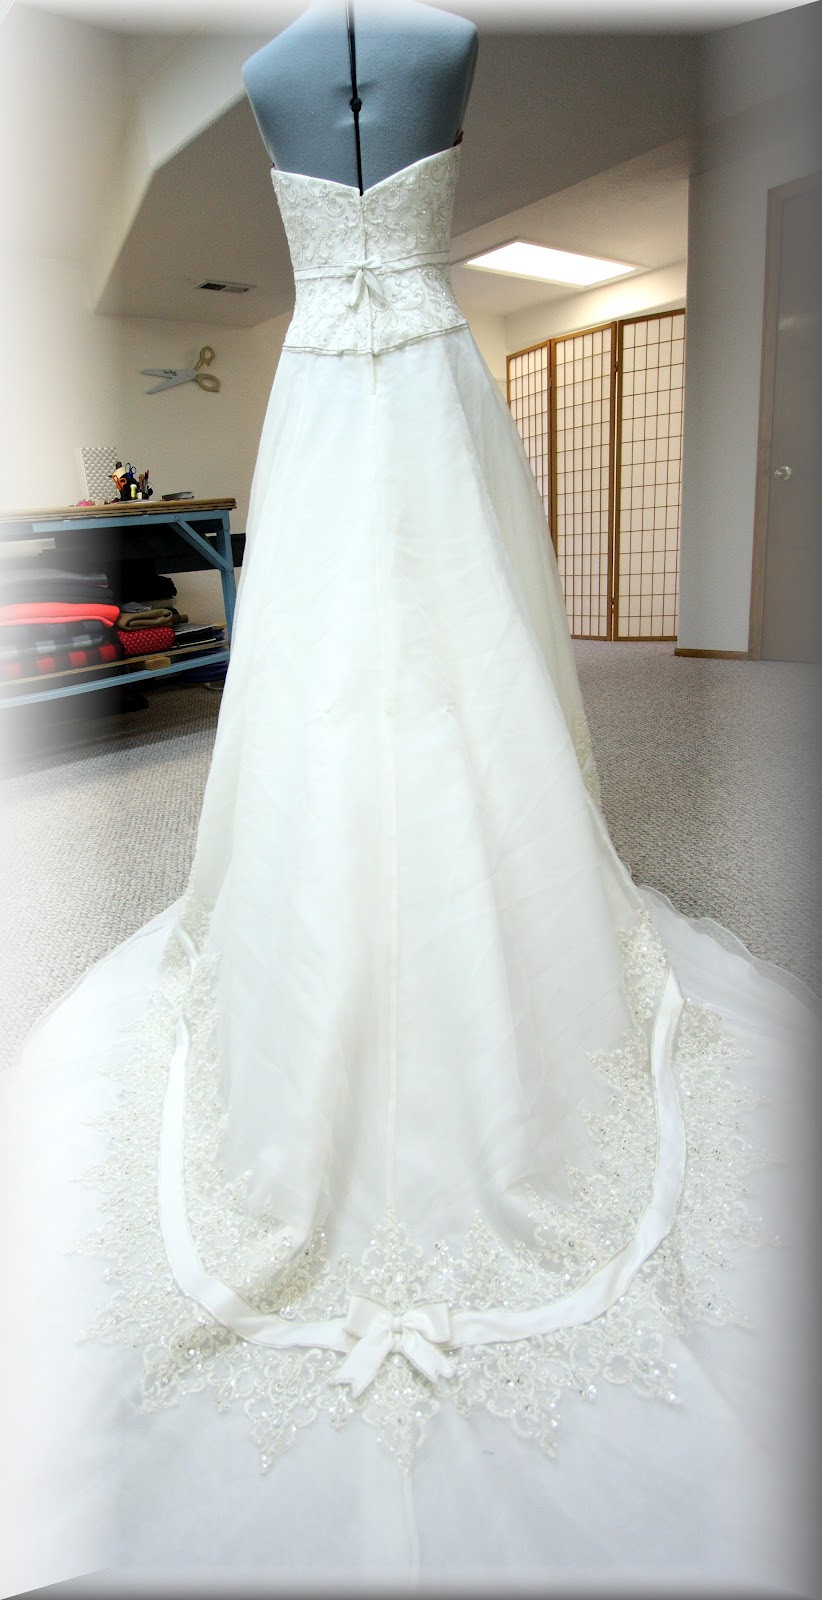 DIY Wedding Dress Bustle
 His Hers and Ours DIY WEDDING GOWN BUSTLE